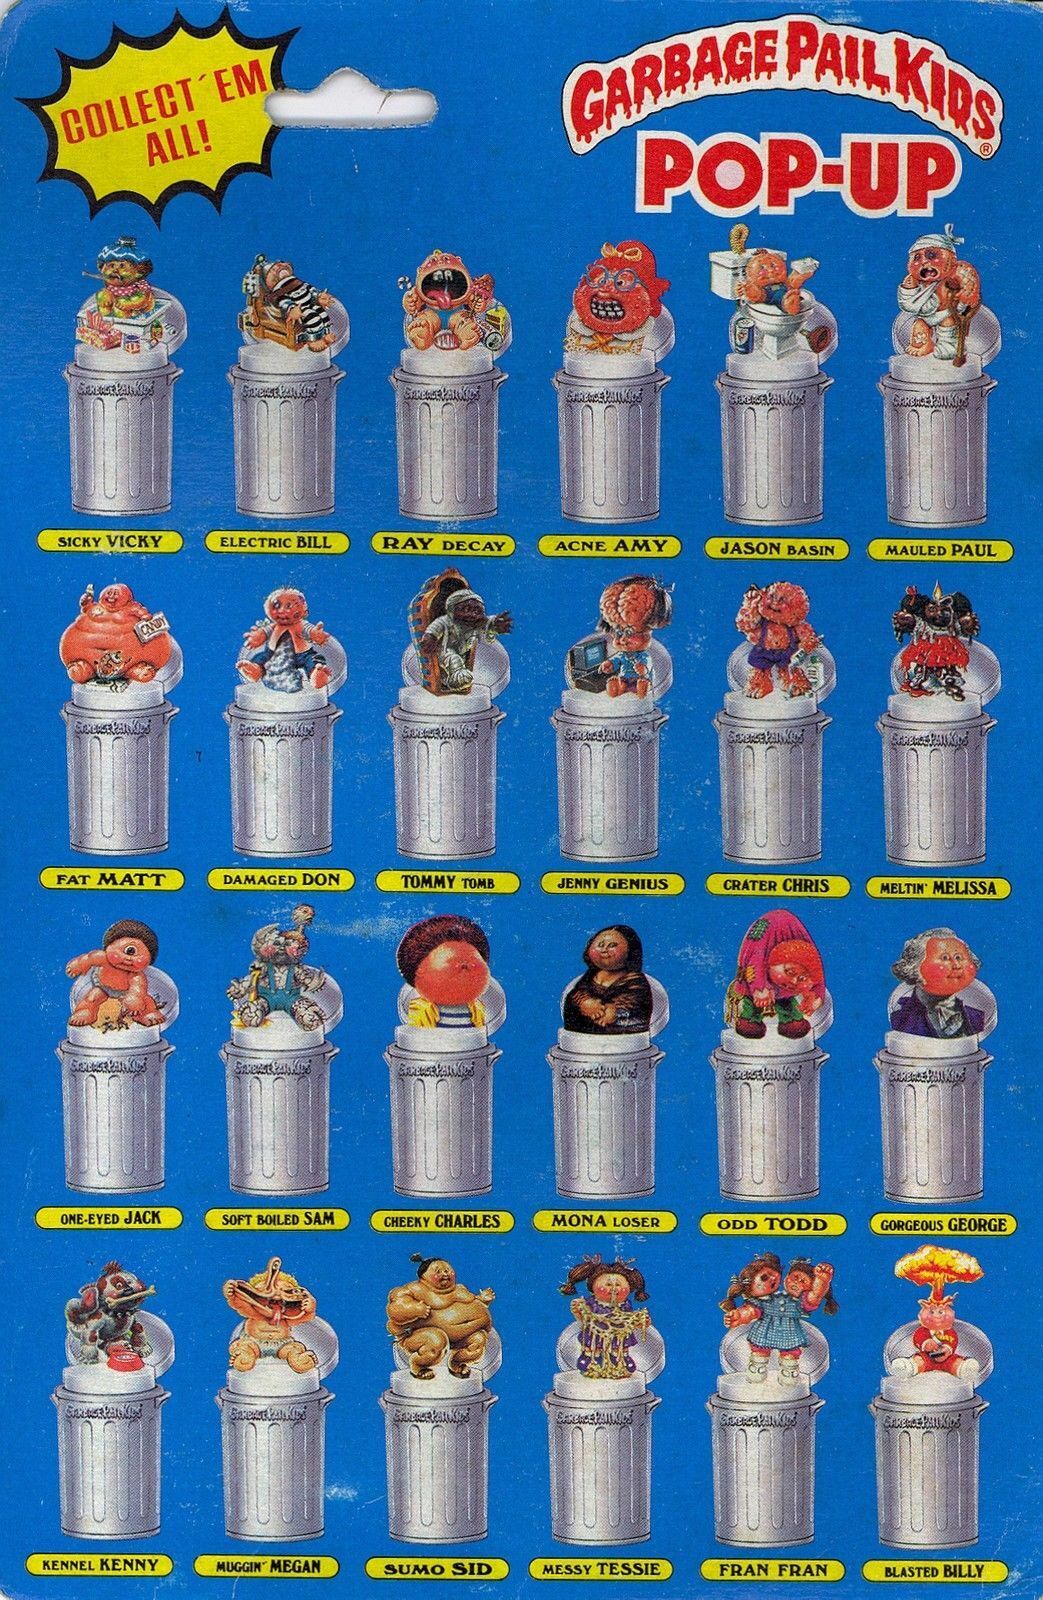 1985 Topps Imperial Toys GARBAGE PAIL KIDS WRAPPIN RUTH Pop-Up GPK Image 2